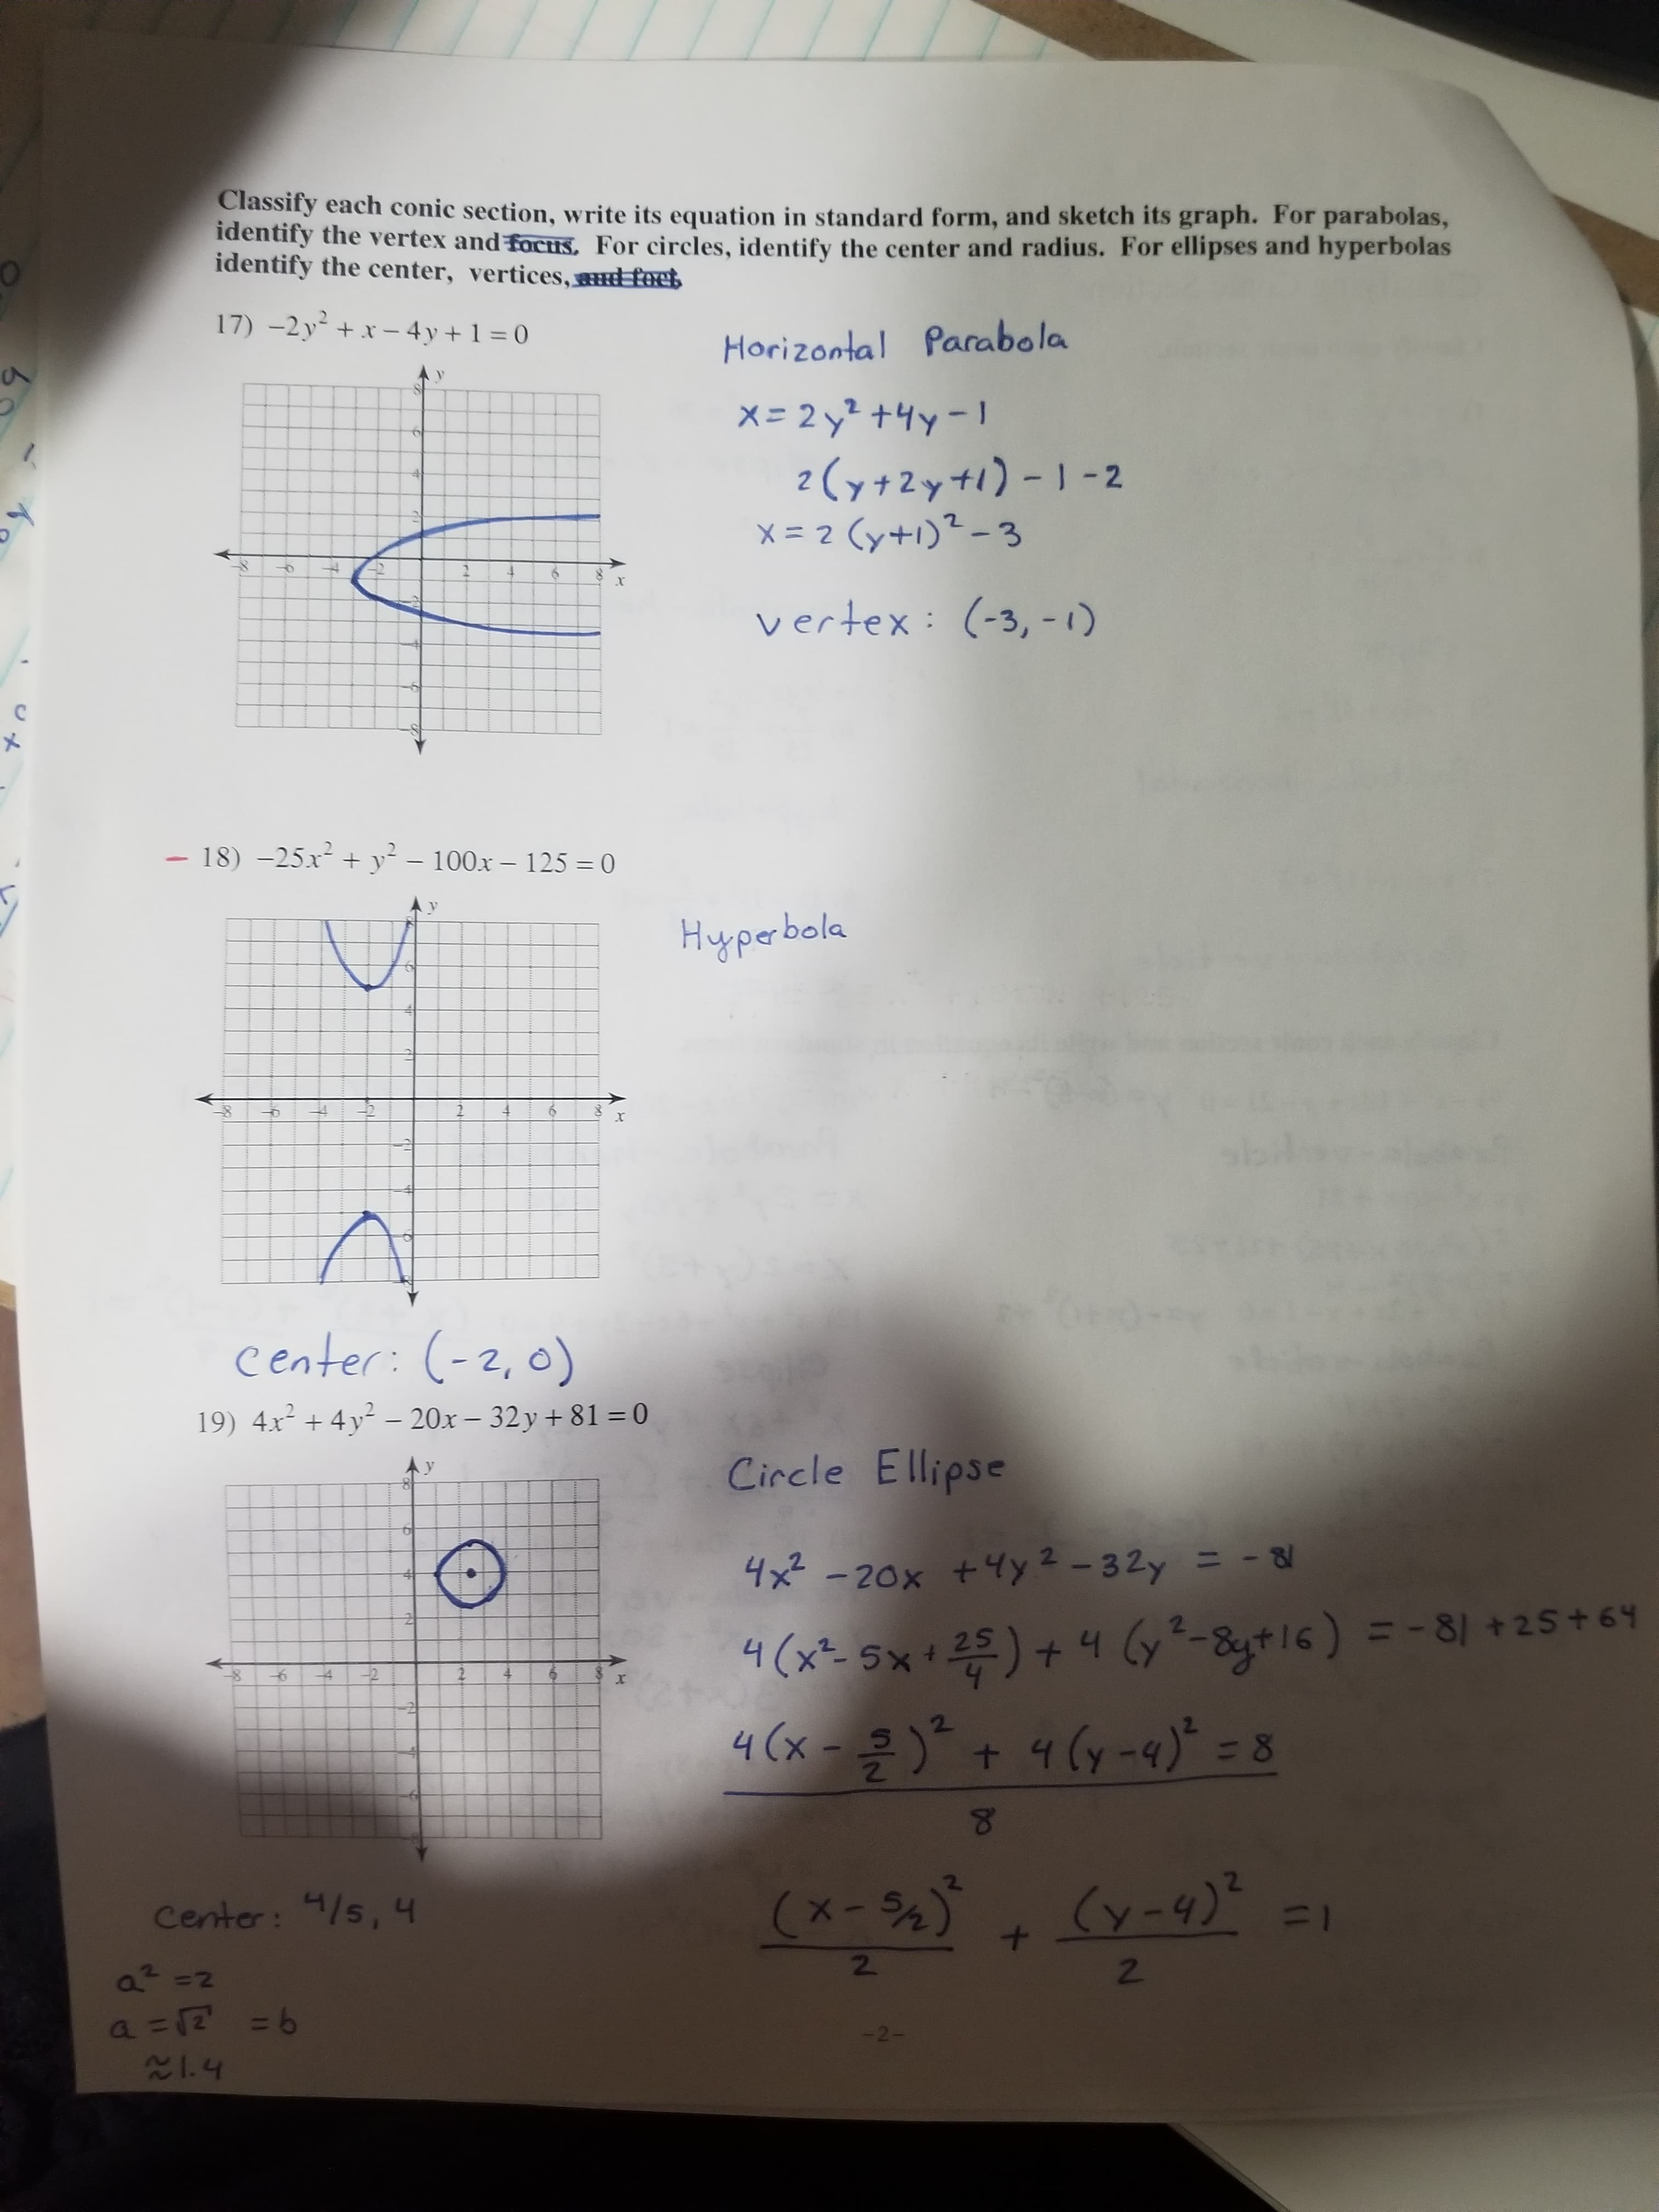 Classify each conic section, write its equation in standard form, and sketch its graph. For parabolas,
identify the vertex and foctis, For circles, identify the center and radius. For ellipses and hyperbolas
identify the center, vertices, et
17) -2y +x – 4y + 1 = 0
Horizontal Parabola
X = 2 y? +4y-1
2(y+2y+1)-1 -2
x = 2 (y+1)² - 3
1.
vertex: (-3, -1)
18) -25.x + y² – 100x – 125 = 0
%3D
Hyperbola
center: (-2,0)
19) 4x² + 4y² – 20x – 32y + 81 = 0
Circle Ellipse
4x -20x +4y2-32y = -
* =)+4 6y²-&g+16) = -81 +25+64
4 (x -)" + 4 (y-4) = 8
%D
4(x²- 5× +
(x-5%)
Center: 4/s, 4
11
2\
2.
-2-
9= Z)=
214
